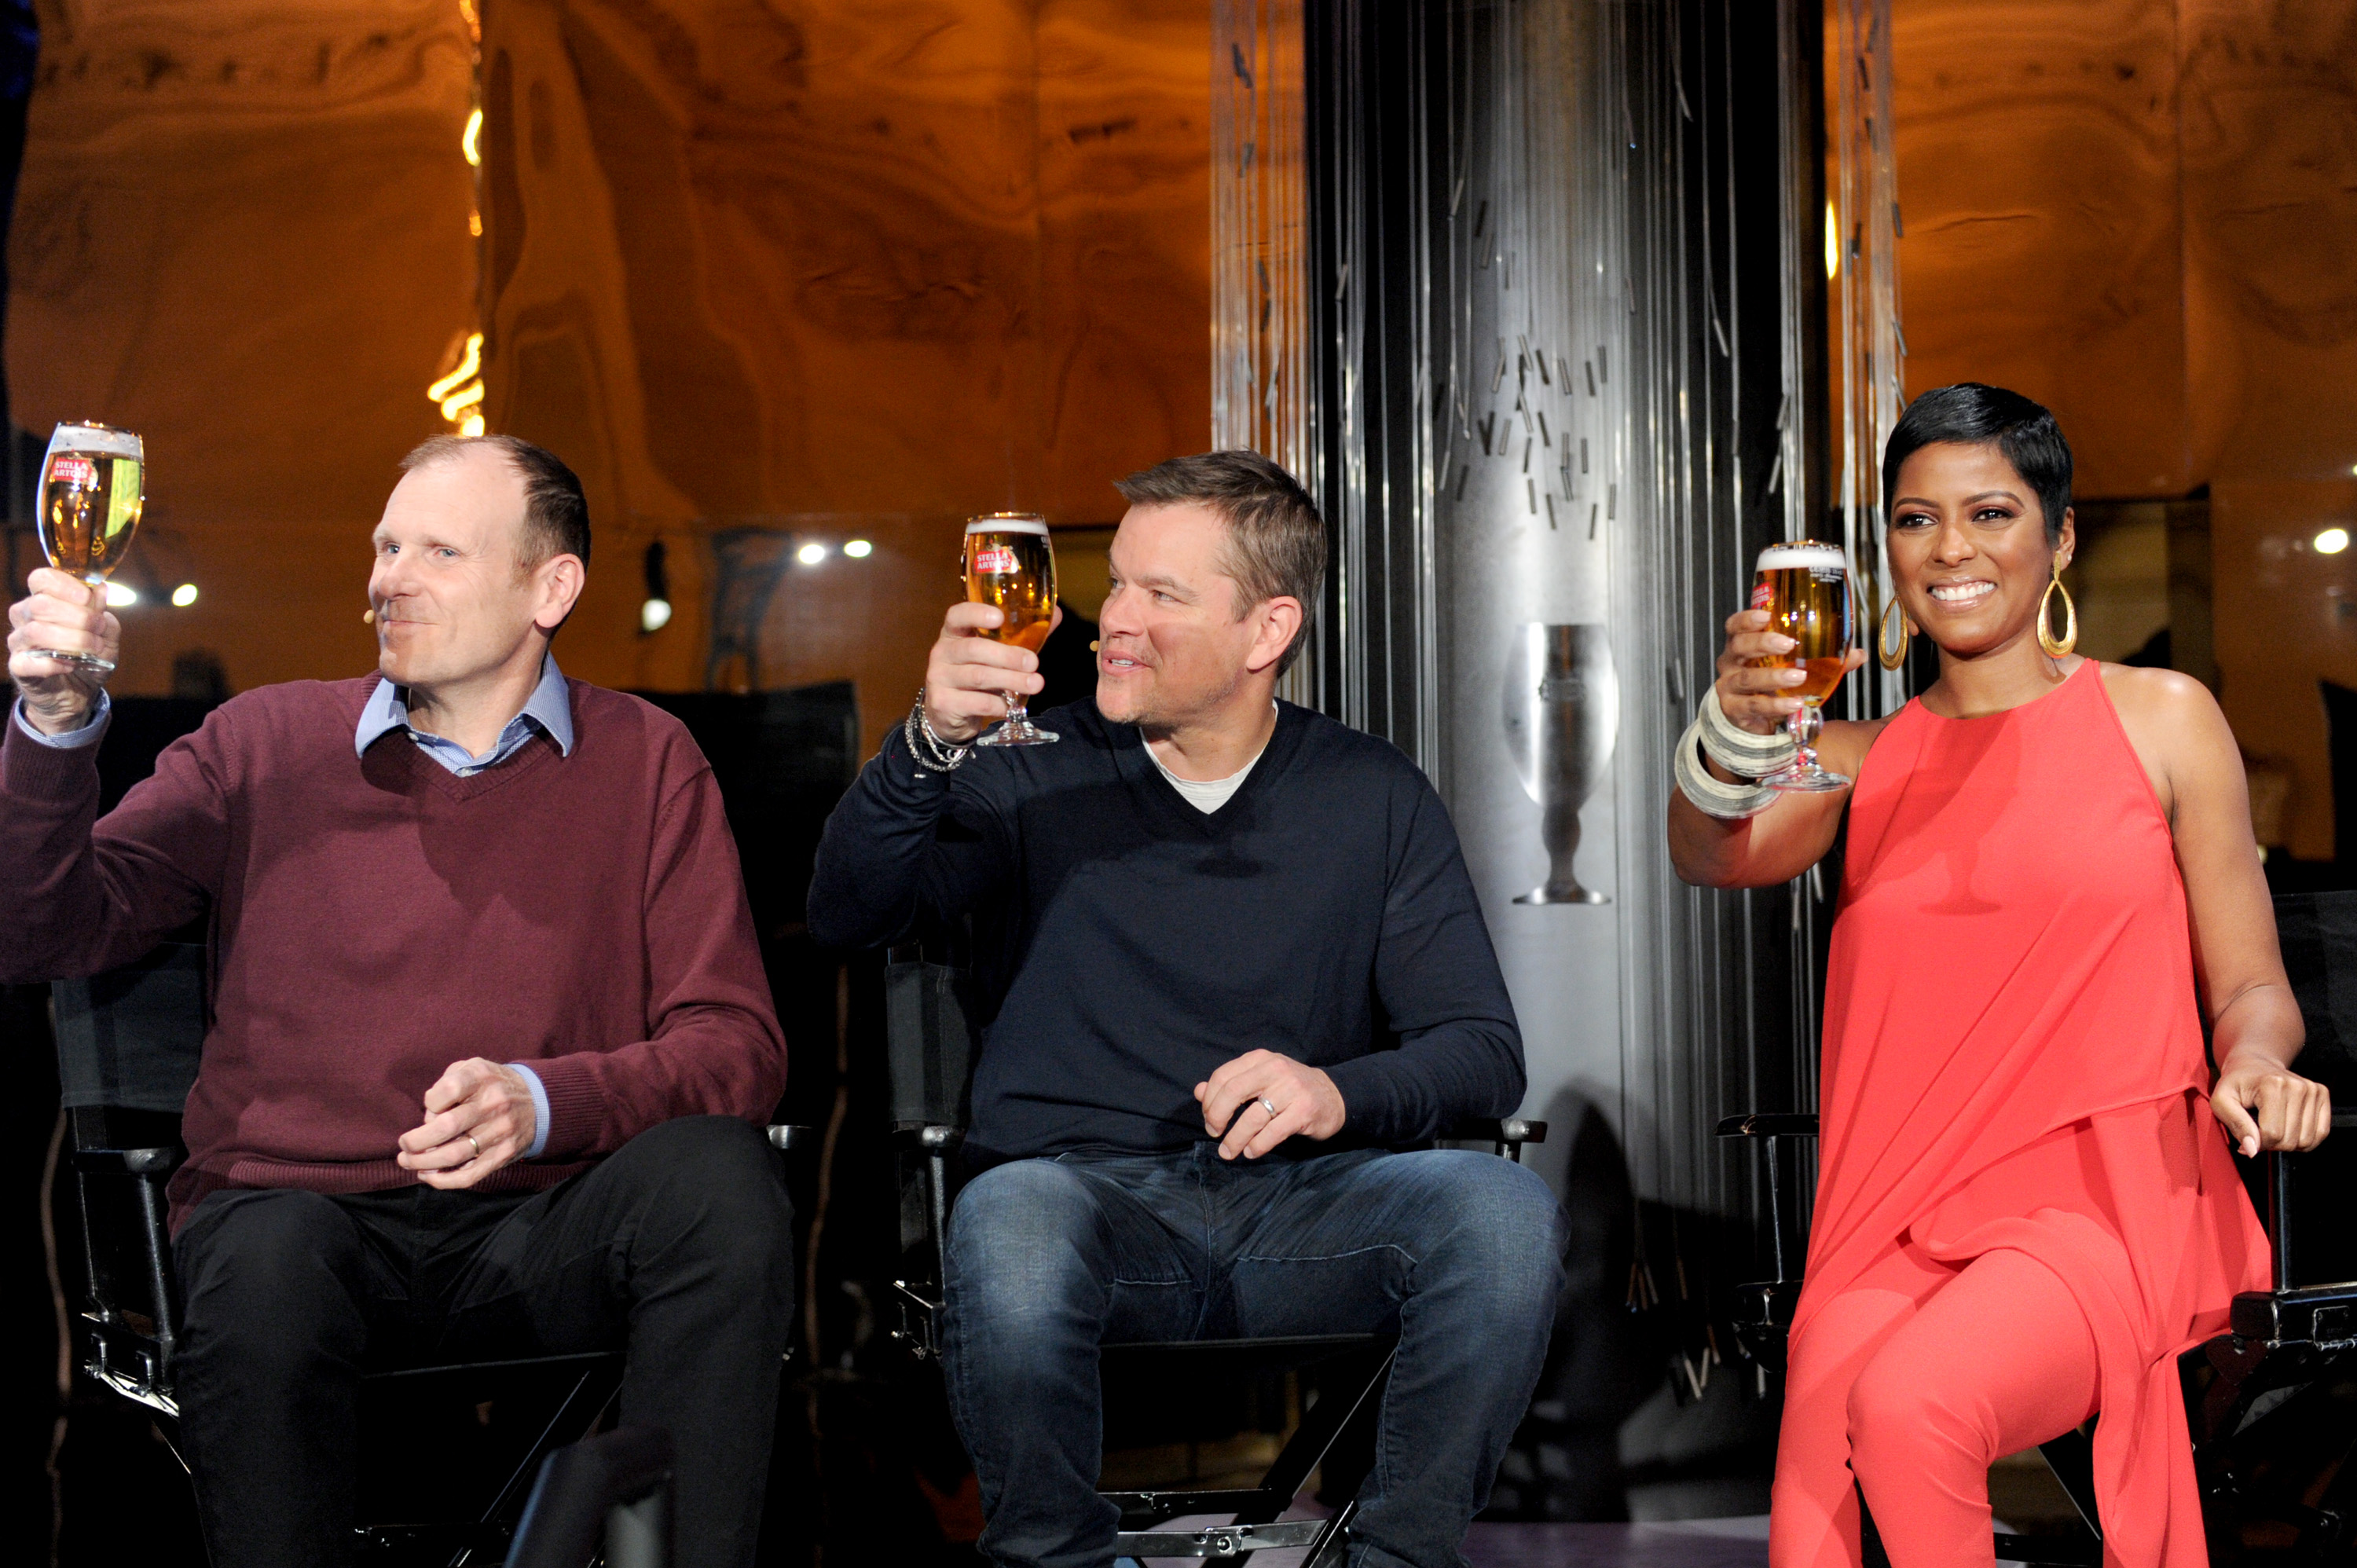 NEW YORK, NY - MARCH 22:  Water.org co-founders Matt Damon and Gary White joined StellaArtois and journalist Tamron Hall to discuss the impact of the brands partnership with Water.org to help end the global water crisis at the unveiling of Water Ripples by Stella Artois at Grand Central Terminal in New York City on March 22, 2018.  (Photo by Craig Barritt/Getty Images for Stella Artois)